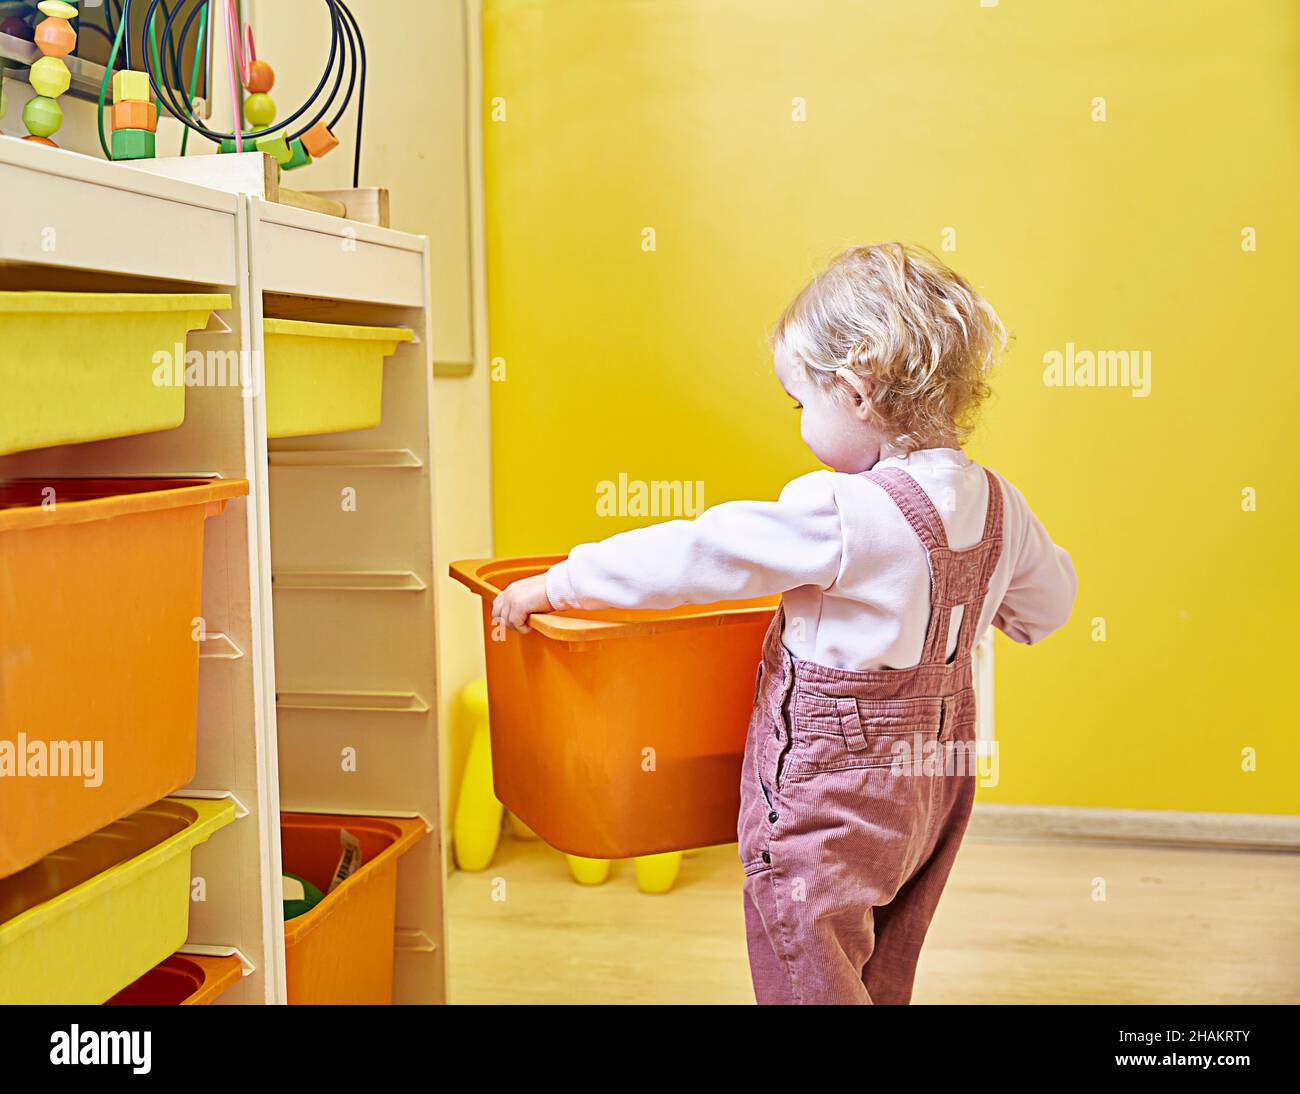 child uses a rack with drawers of the chest of drawers type, which allows effective use of small living spaces. Copy space. Stock Photo